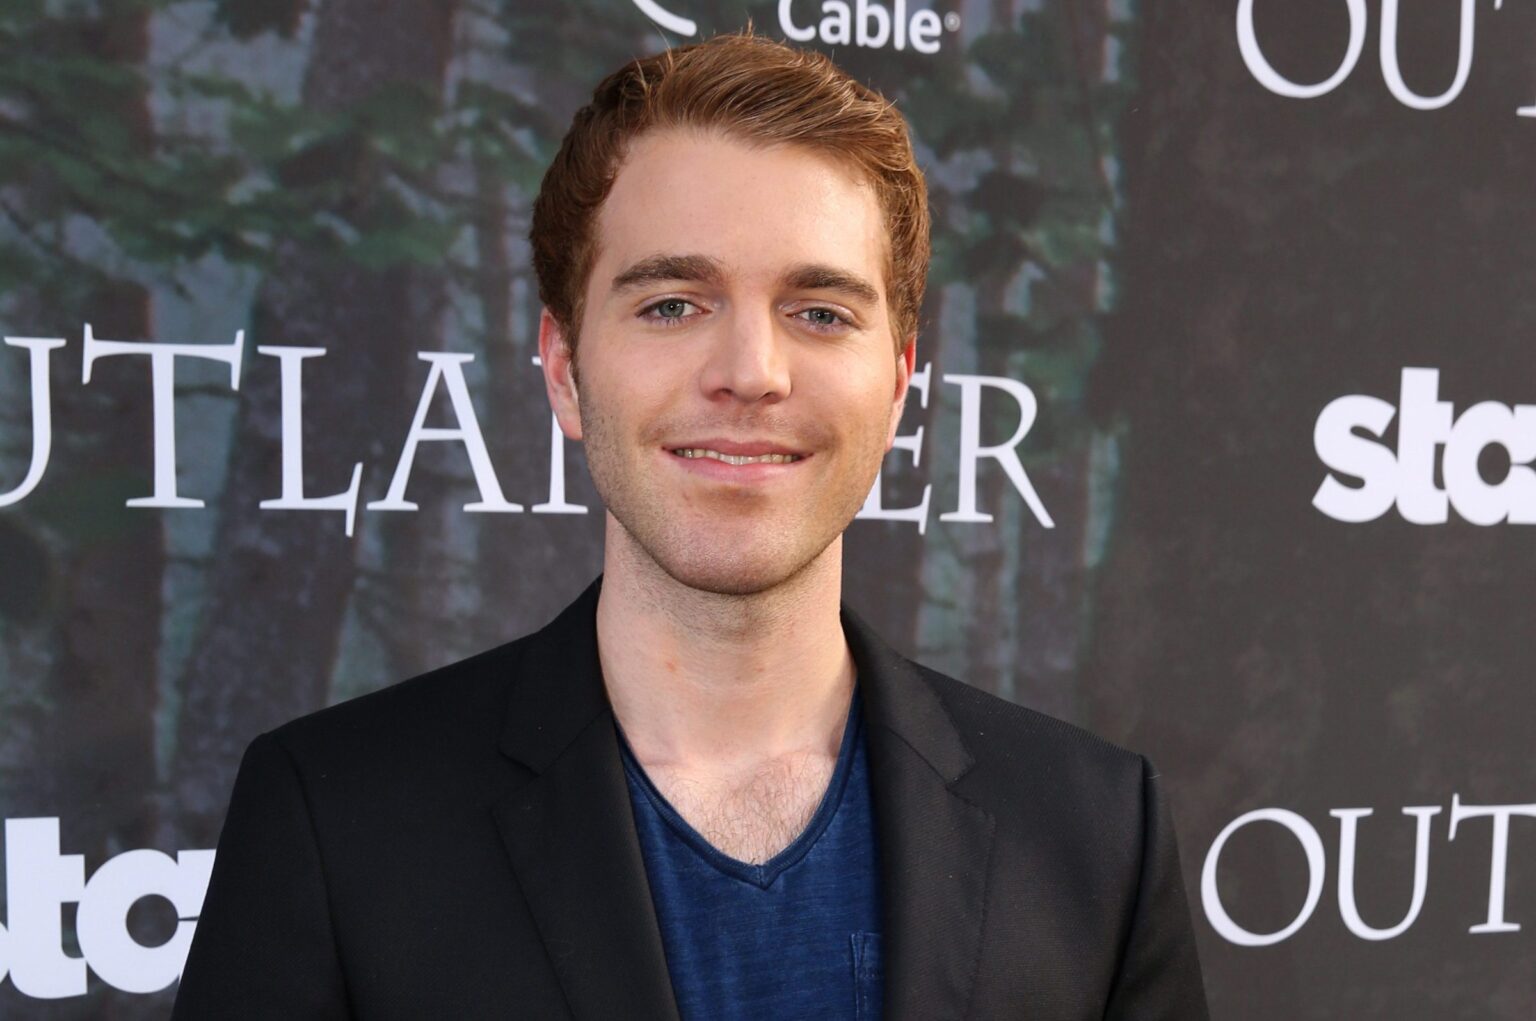 Shane Dawson has been reviled on YouTube and Twitter for a long time now, but has he been canceled for good?